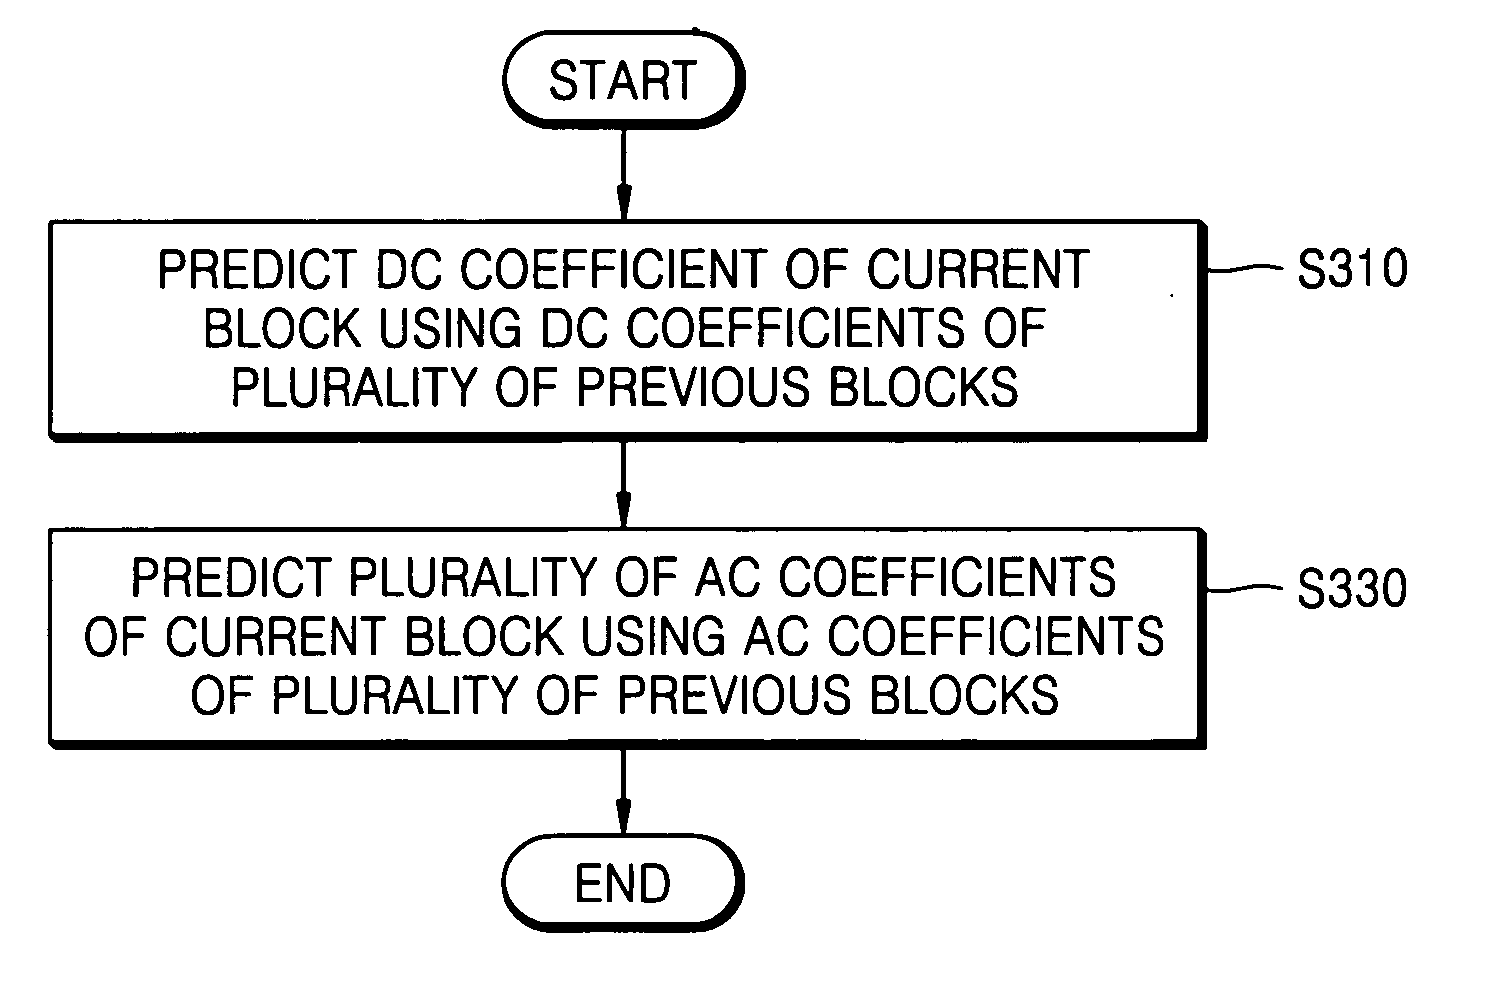 Apparatus and method for predicting coefficients of video block